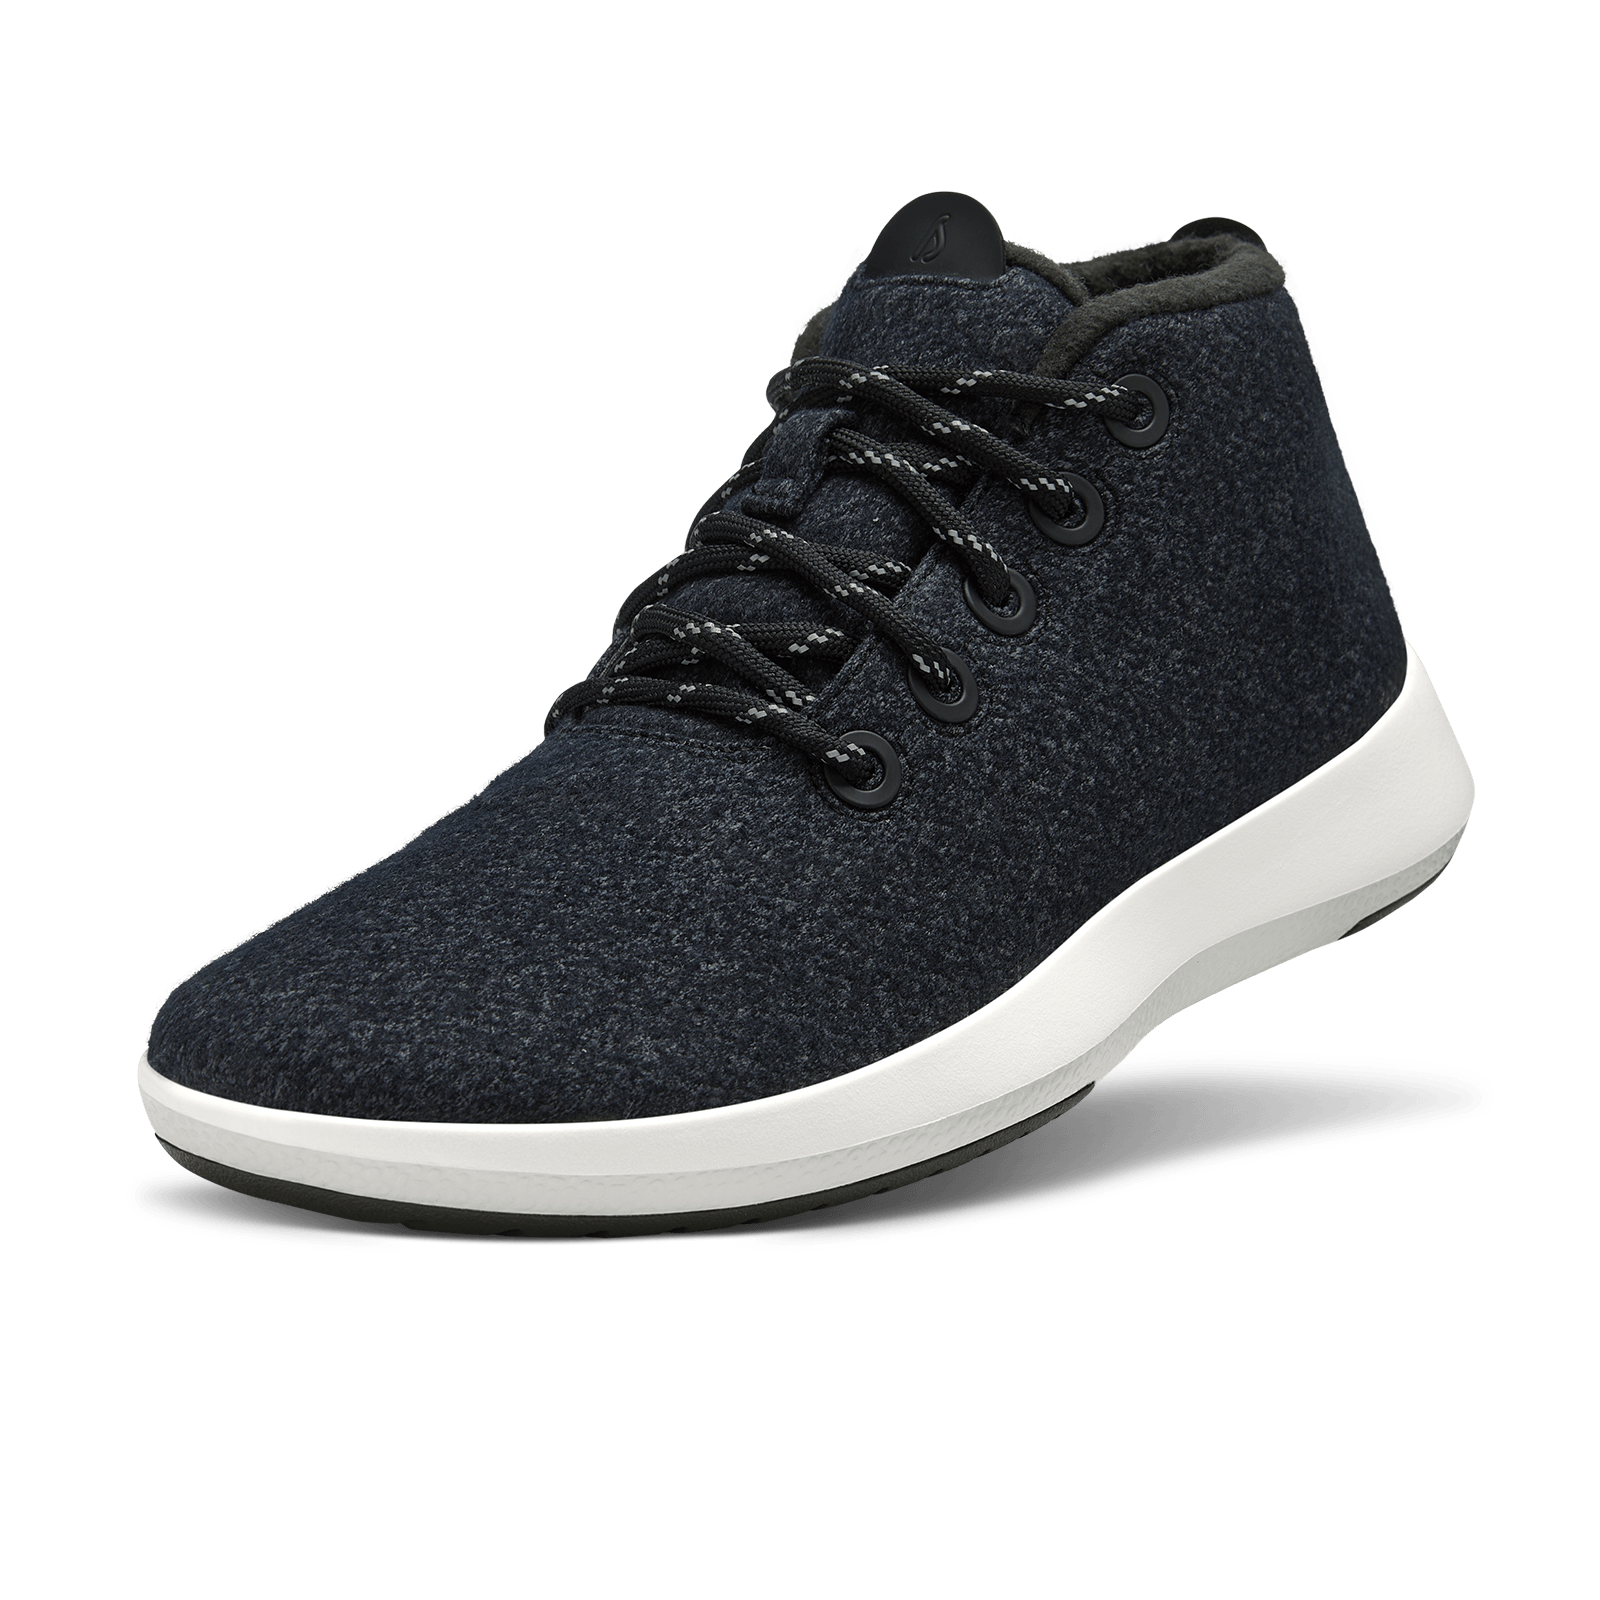 Women's Wool Runner-up Mizzles - Natural Black (Natural White Sole)